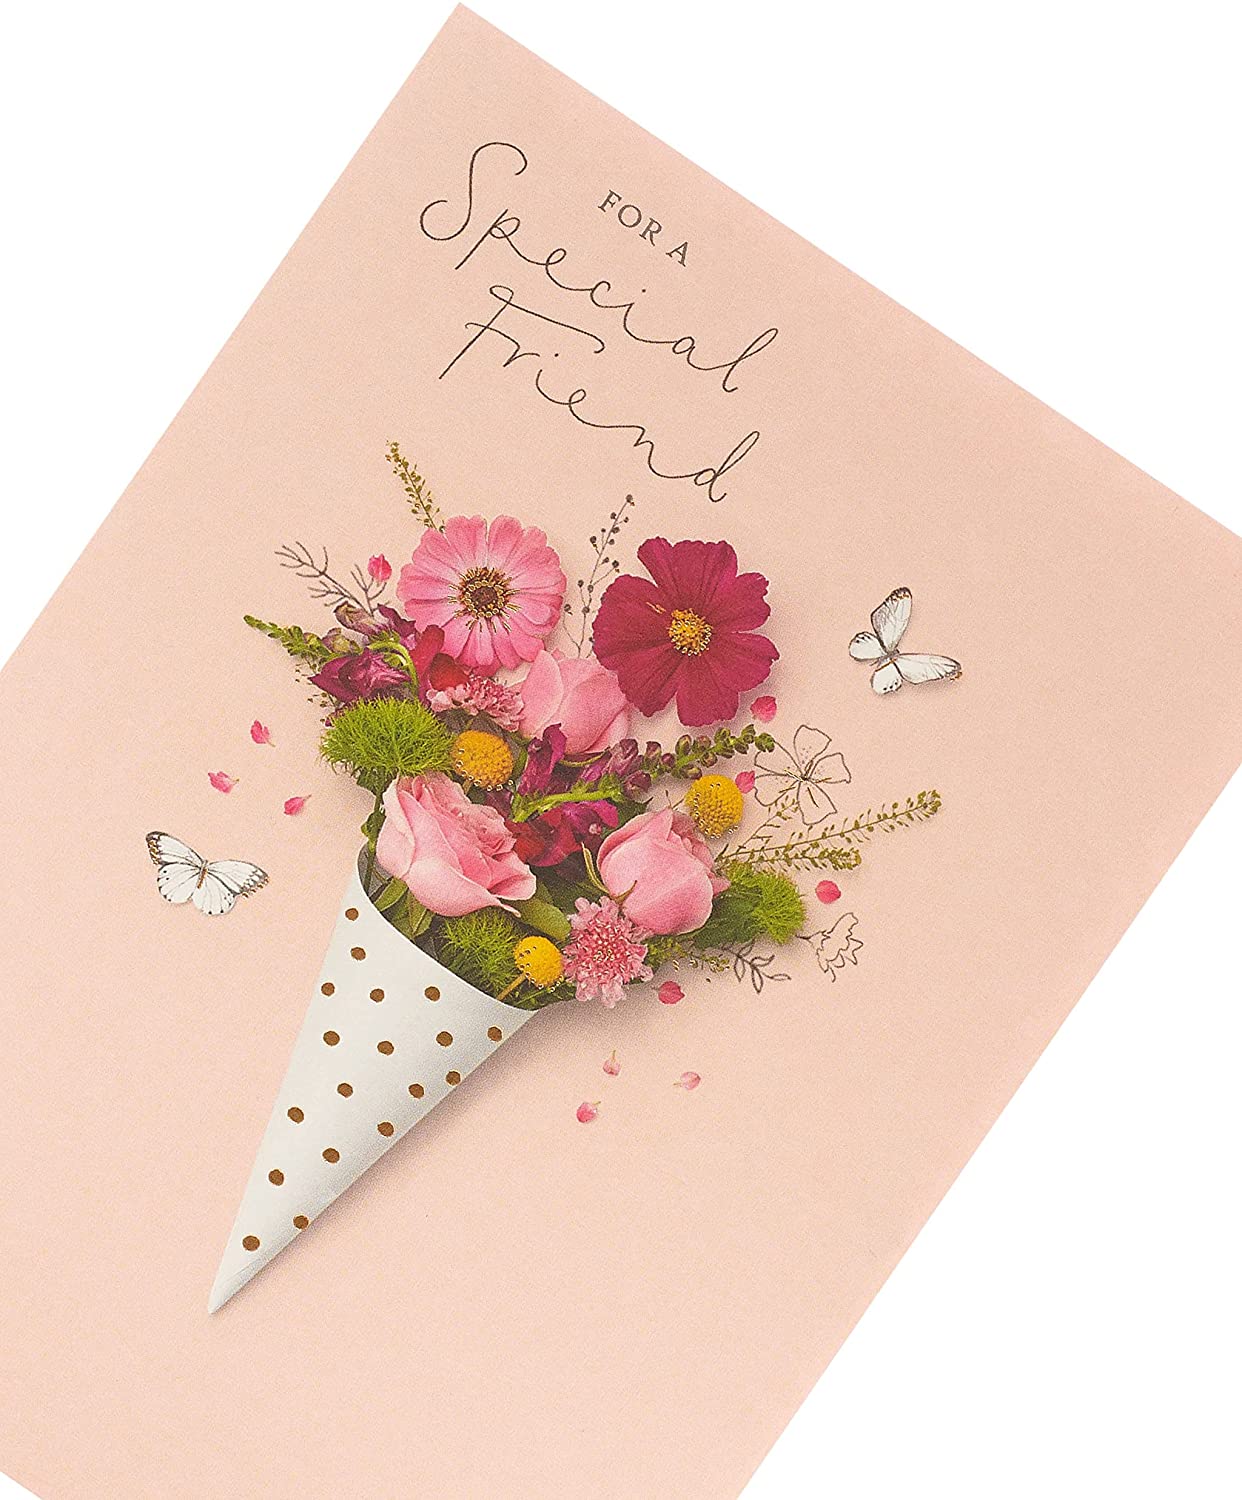 Cute Photographic Floral Design Birthday Card